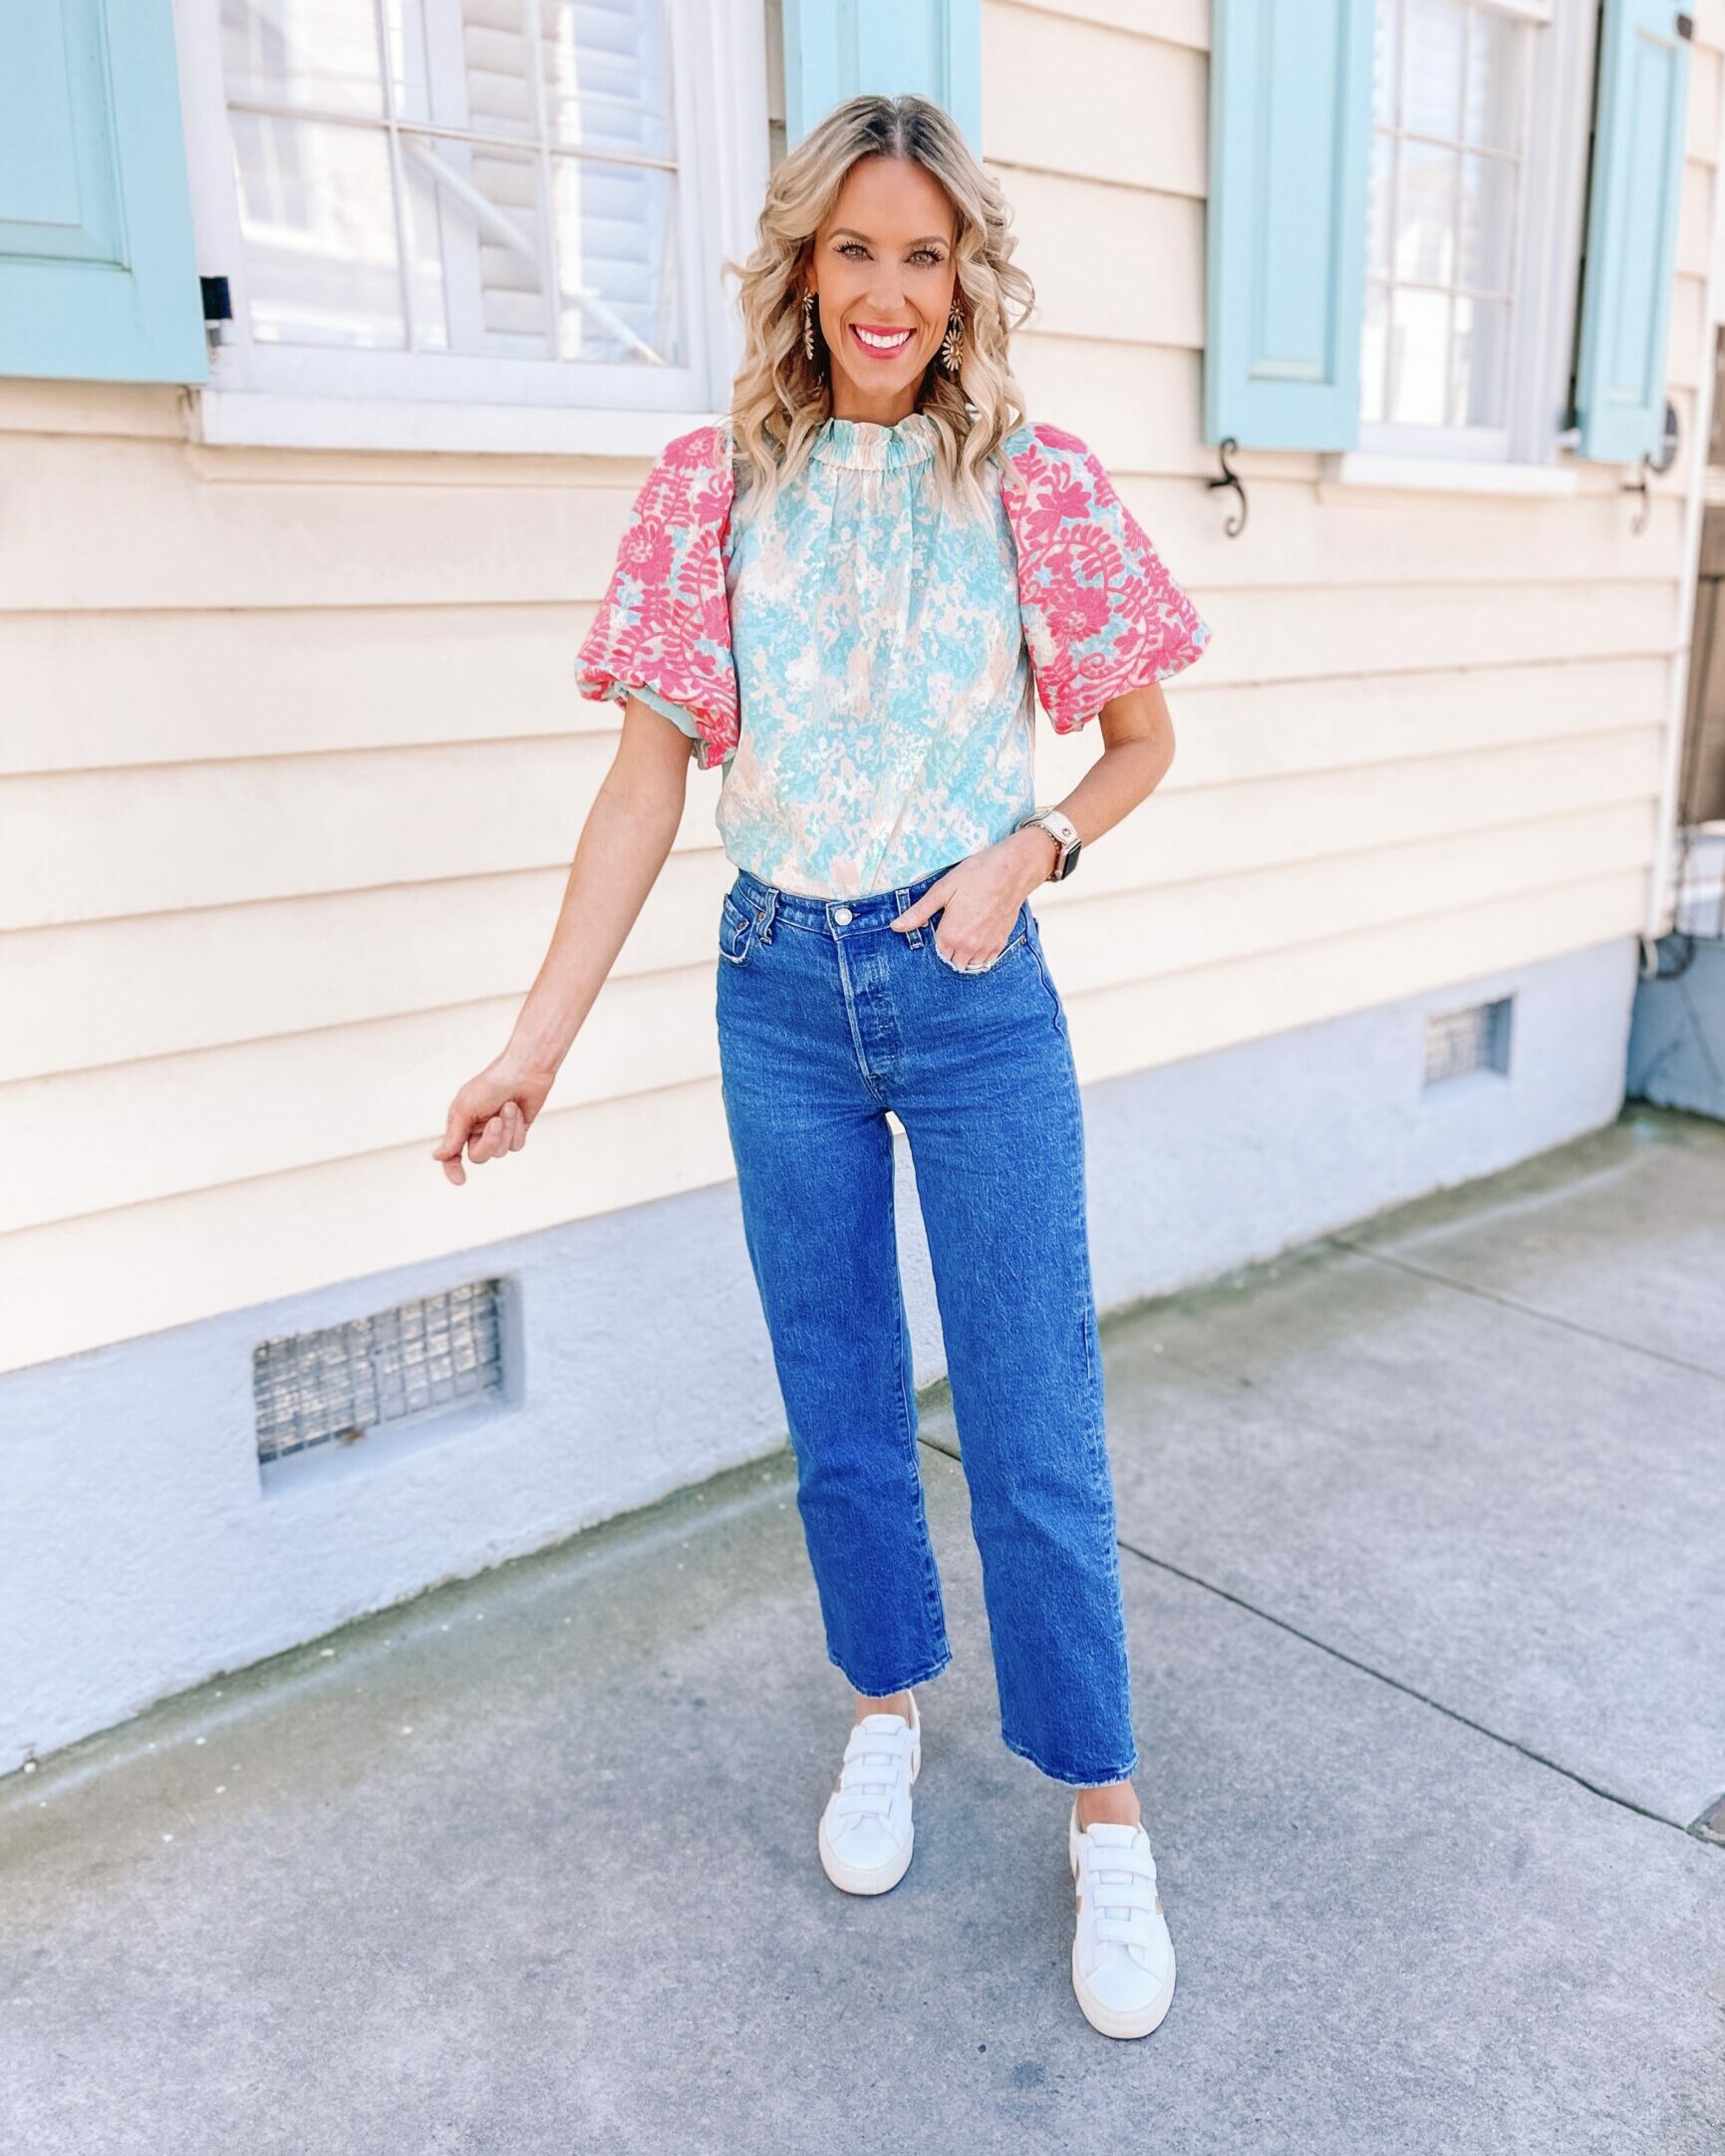 Sharing a pretty Avara try on haul with some gorgeous spring blouses and dresses perfect for Easter! You'll love this gorgeous puff sleeve top with embroidery!